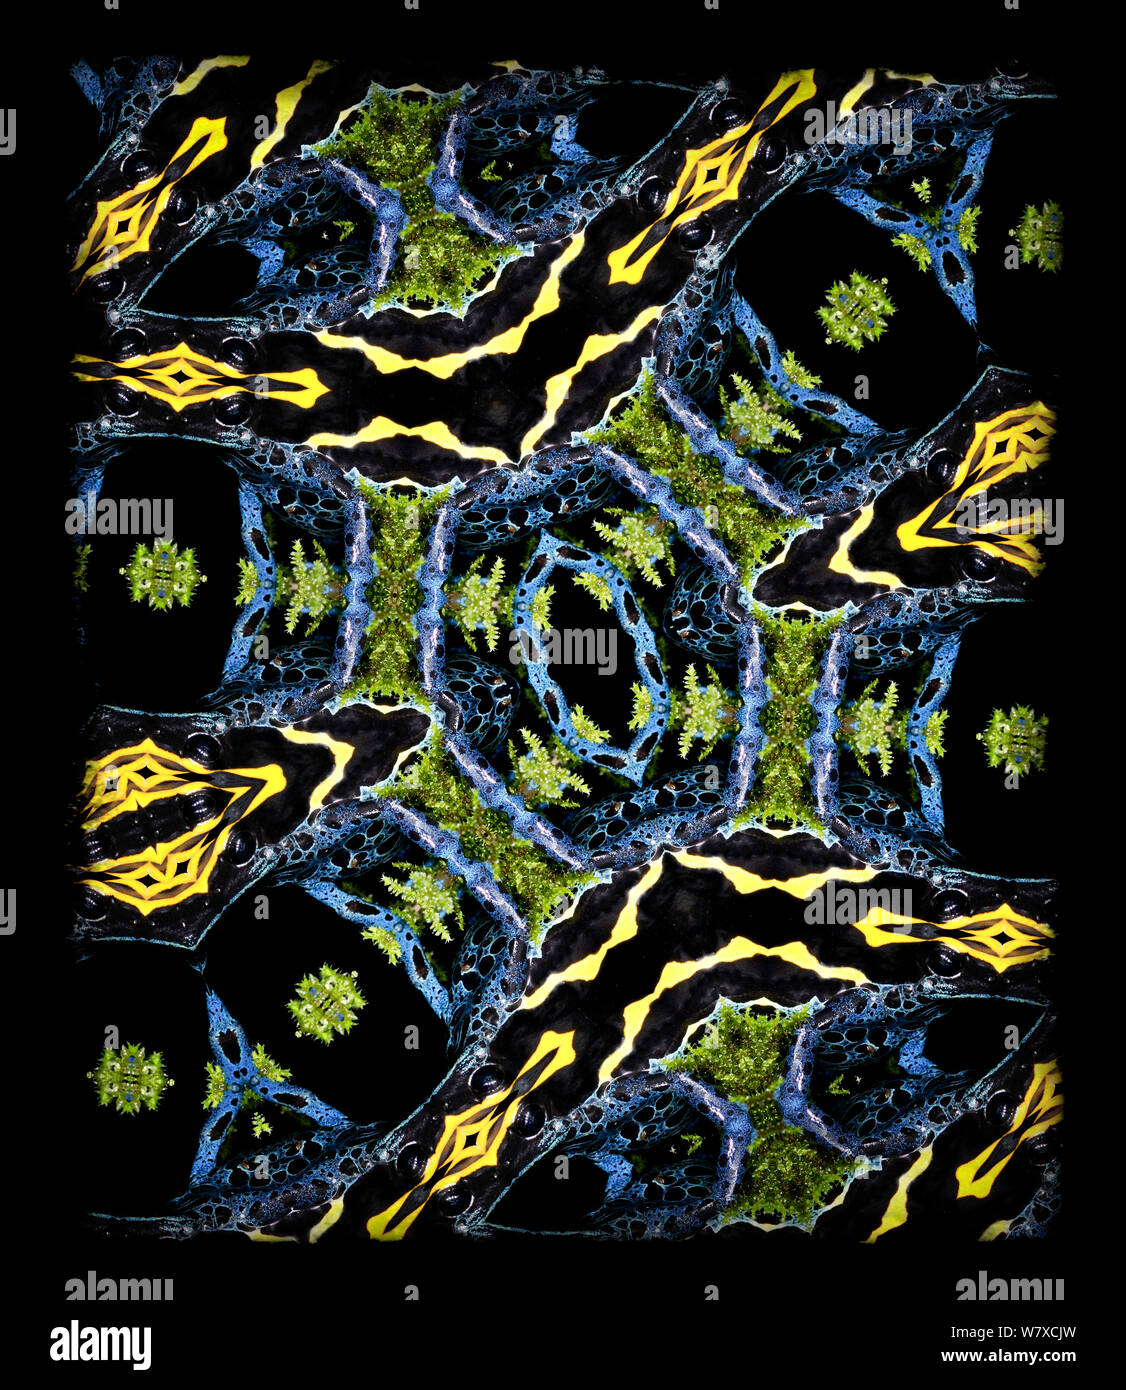 Kaleidoscope pattern formed from picture of Poison Dart Frog (Dendrobates tinctoruis) EMBARGOED FOR NAT GEO UNTIL the end of 2015 Stock Photo